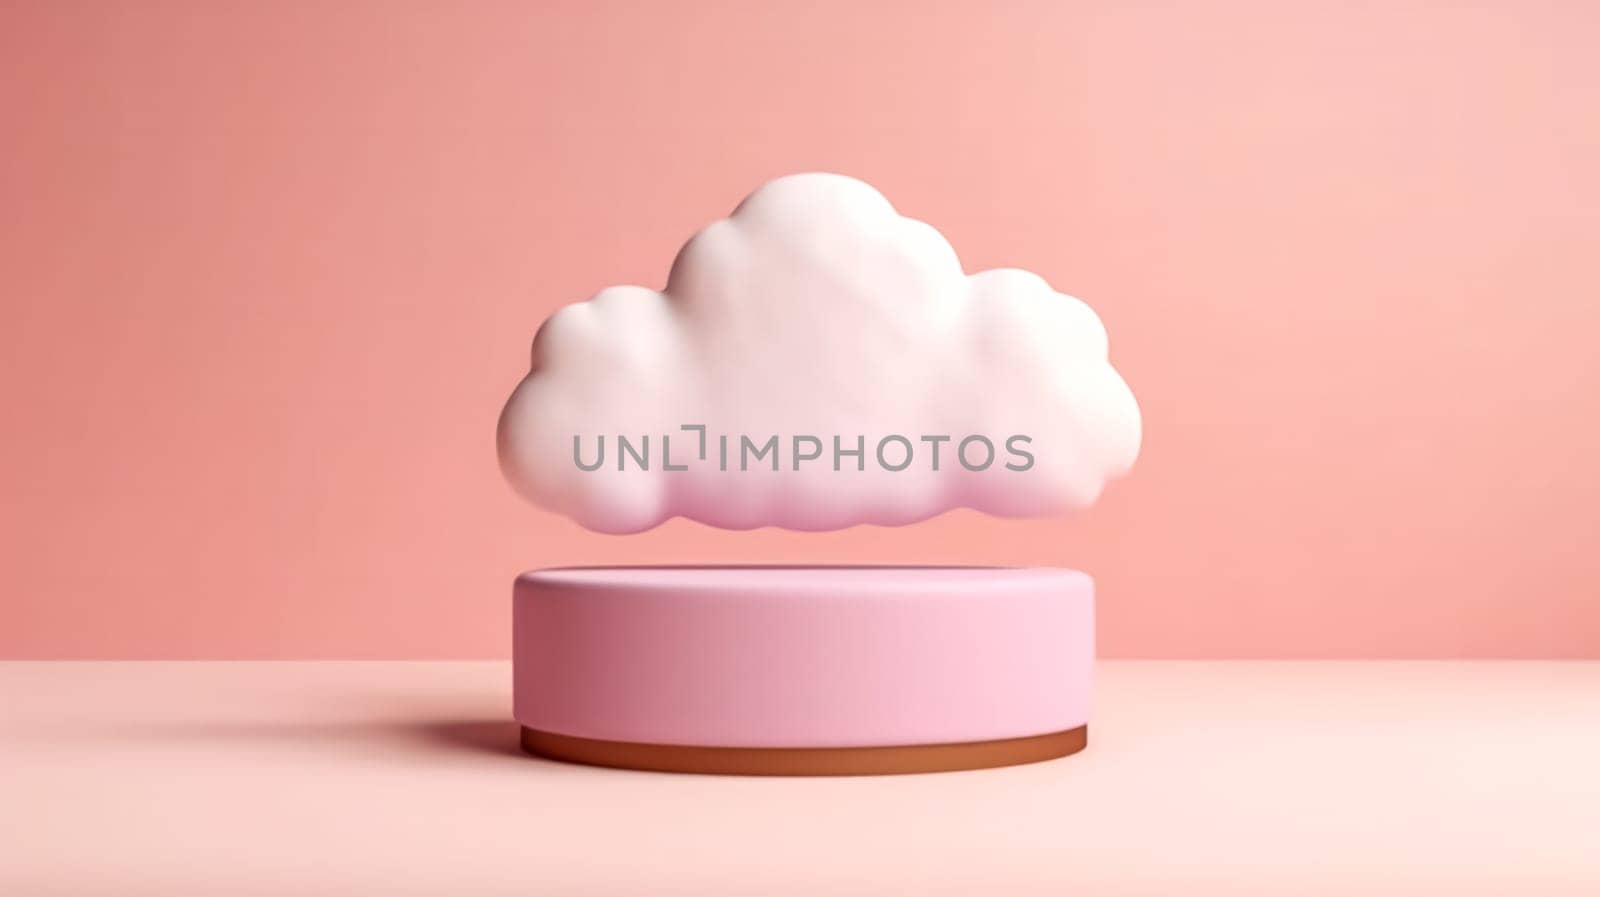 A 3D rendering of a podium positioned amidst flat clouds with reddish tones, providing an atmospheric setting for product display and presentation.